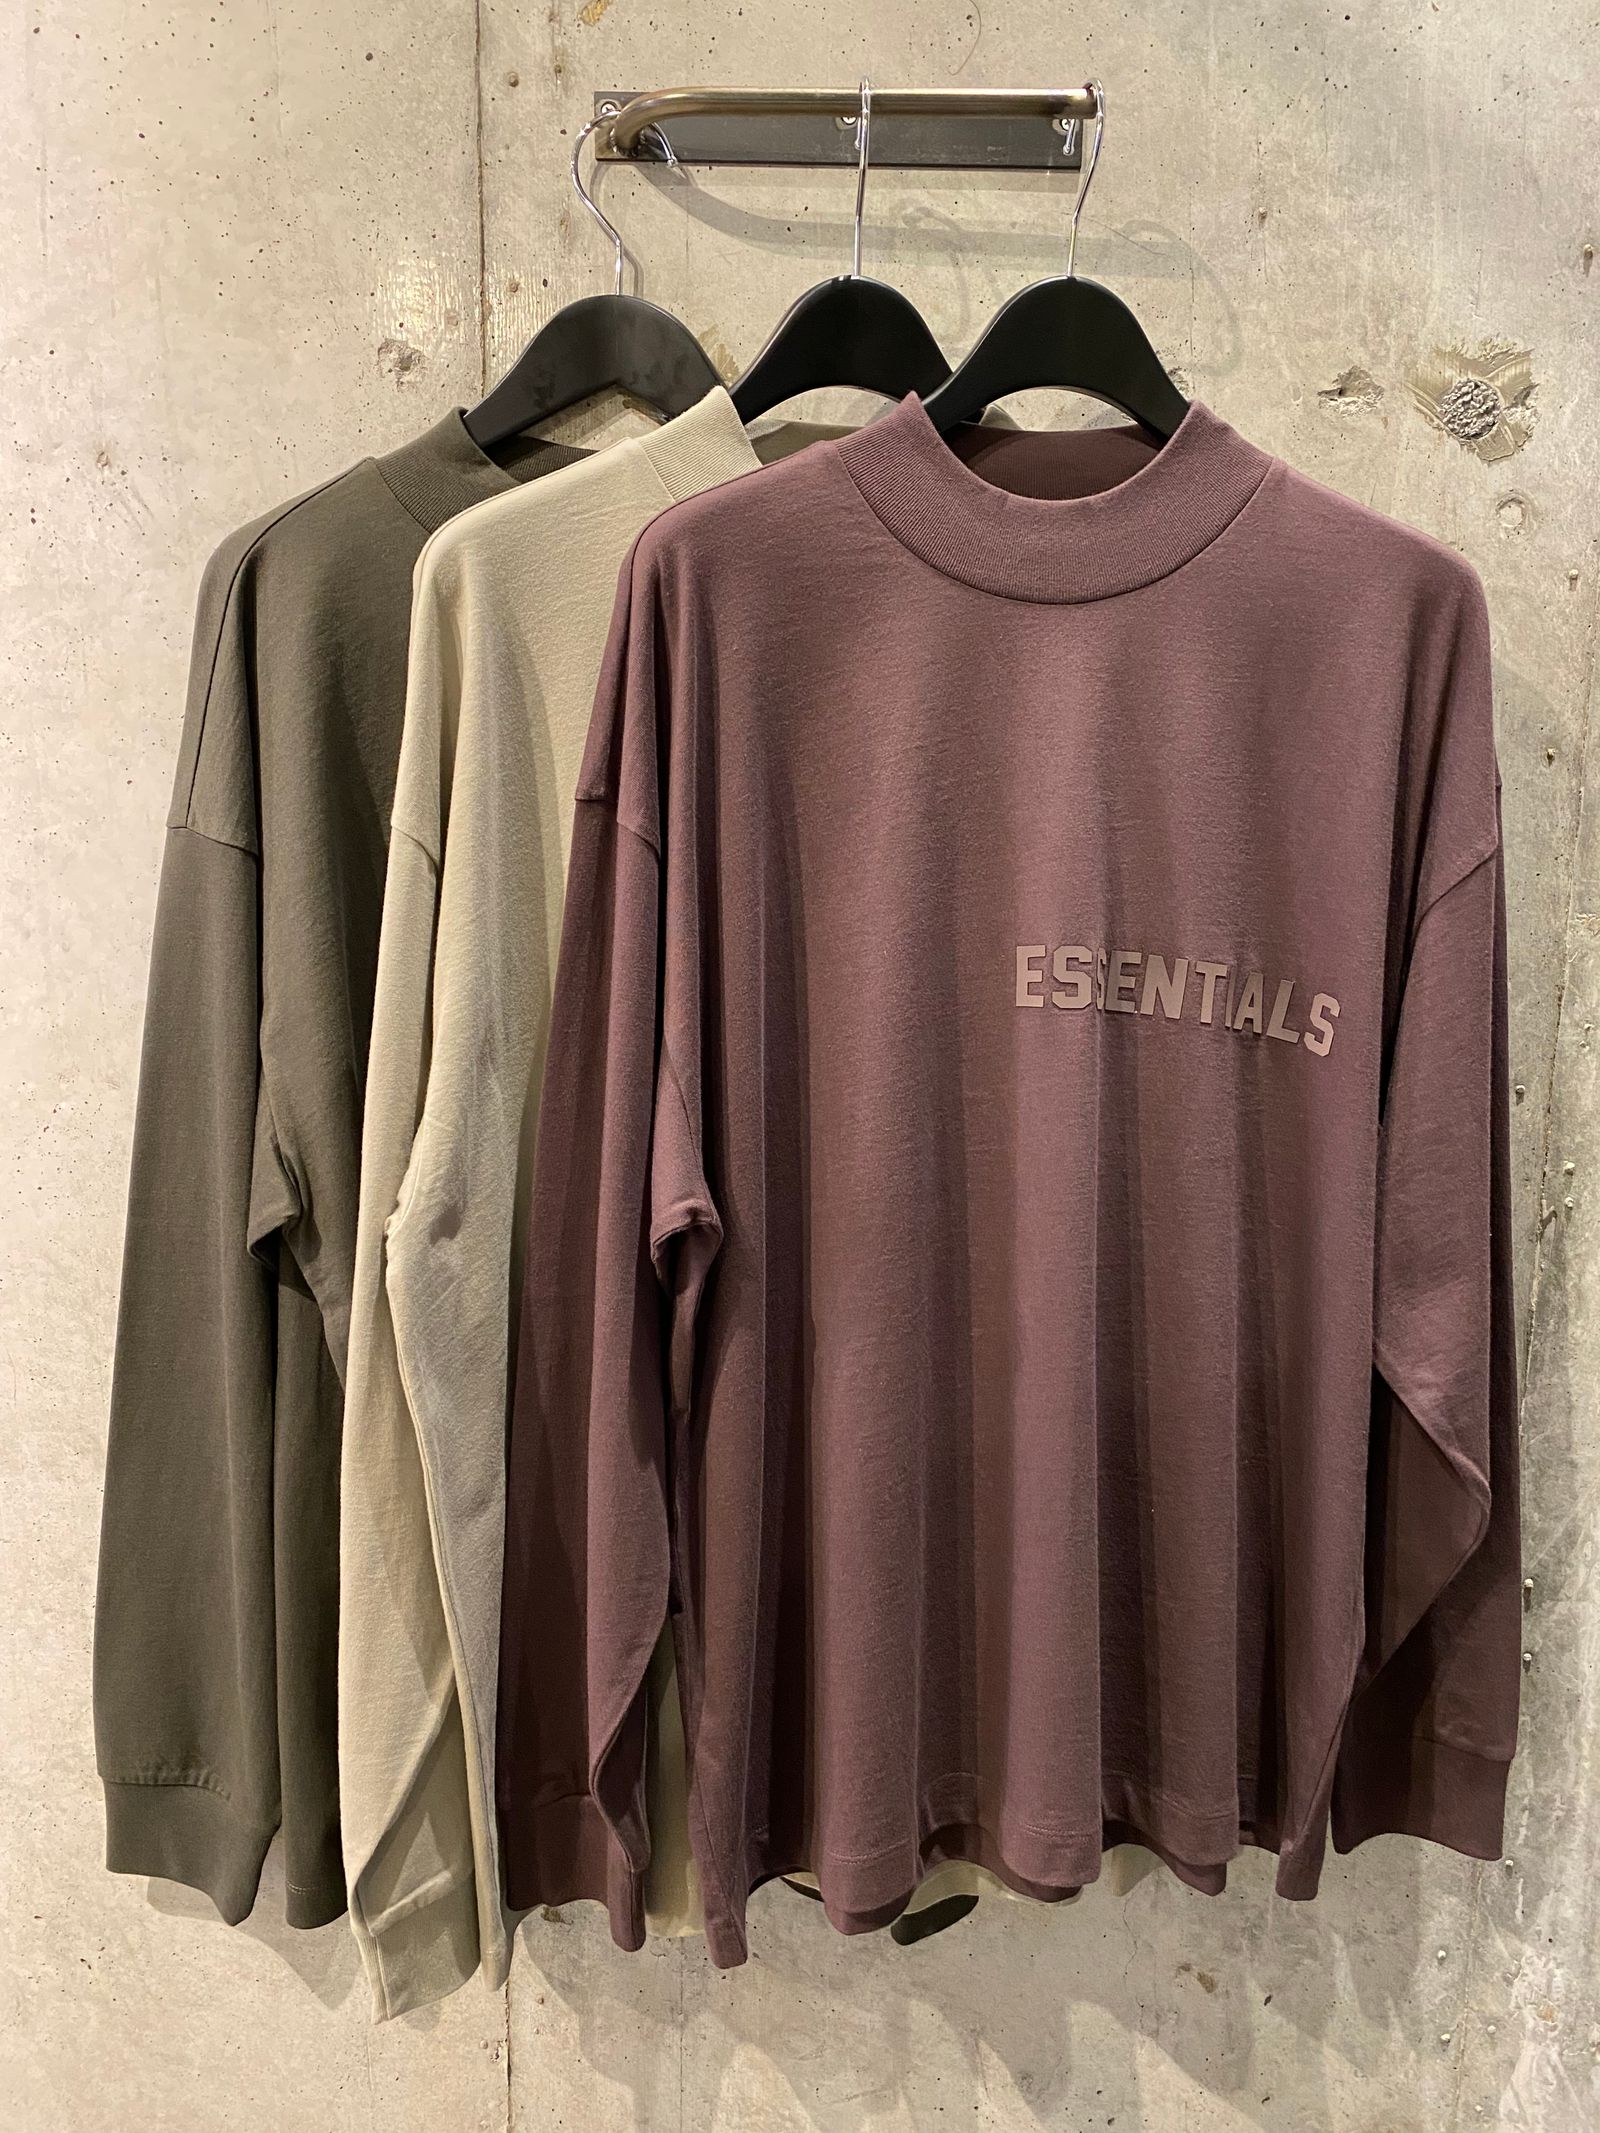 FOG ESSENTIALS - ESSENTIALS L/S Tshirt(PLUM) | R and another